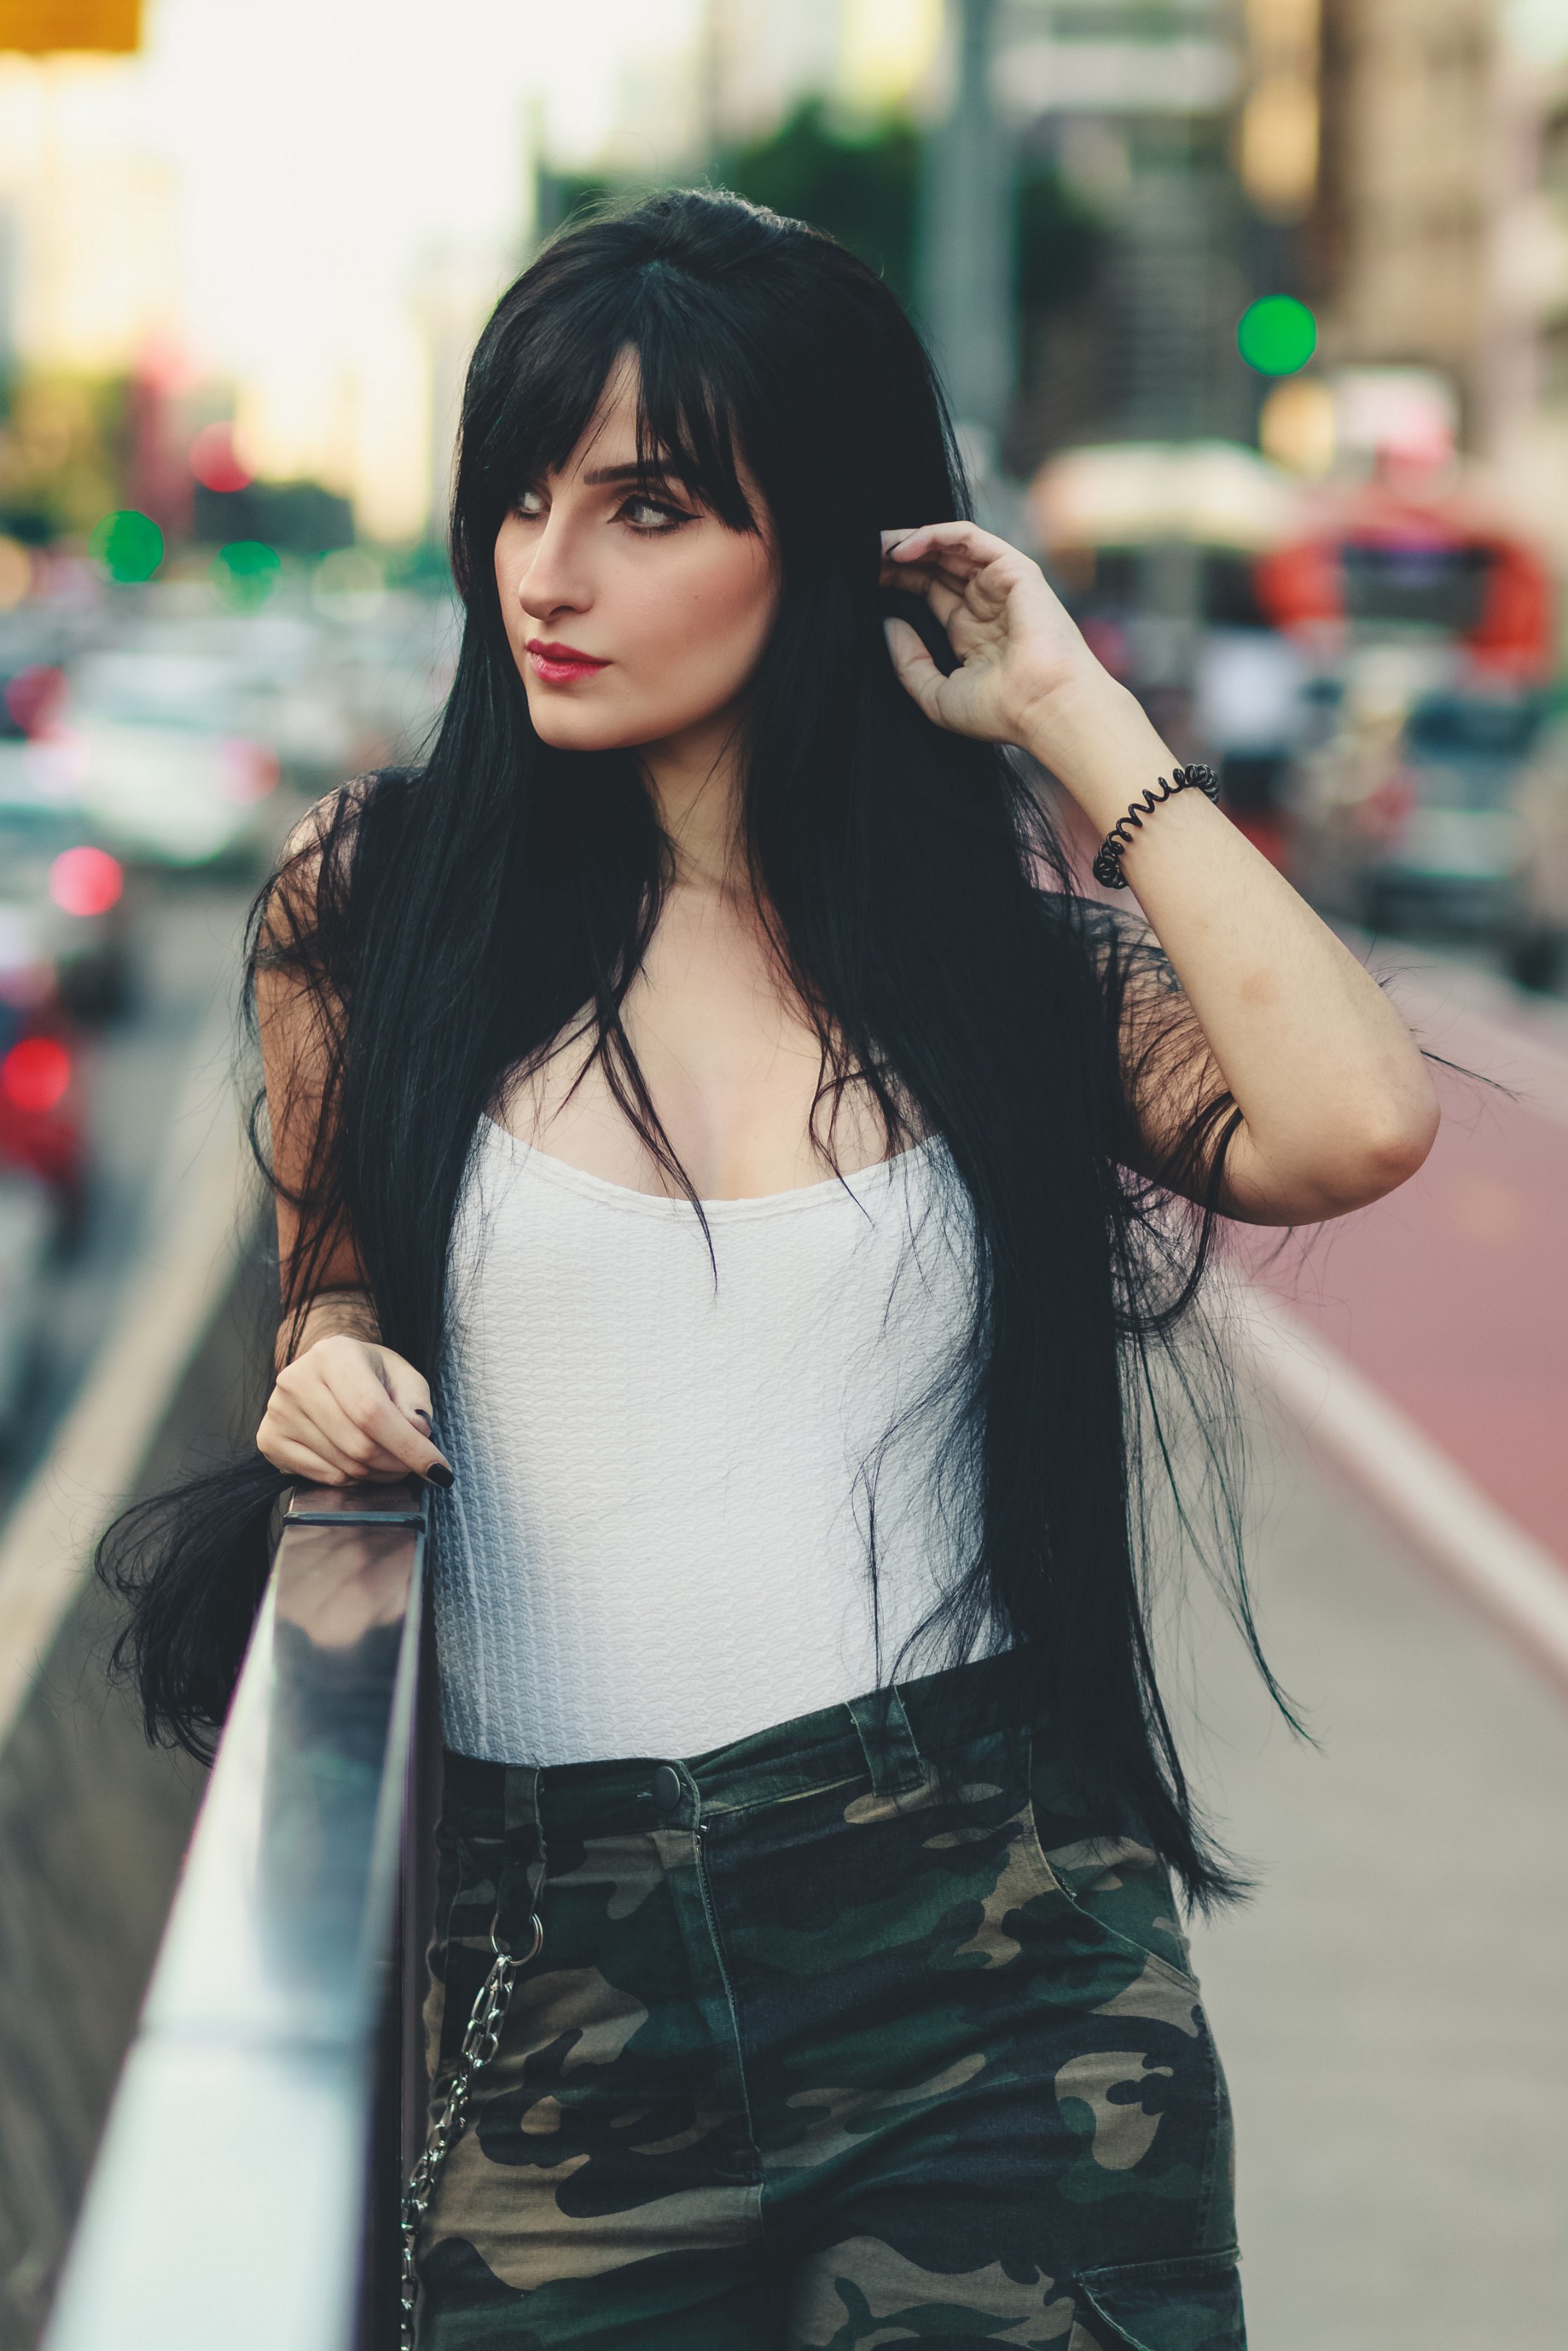 People 1838x2756 women model urban camo pants long hair dark hair depth of field city standing looking into the distance lipstick painted nails women outdoors outdoors looking away makeup